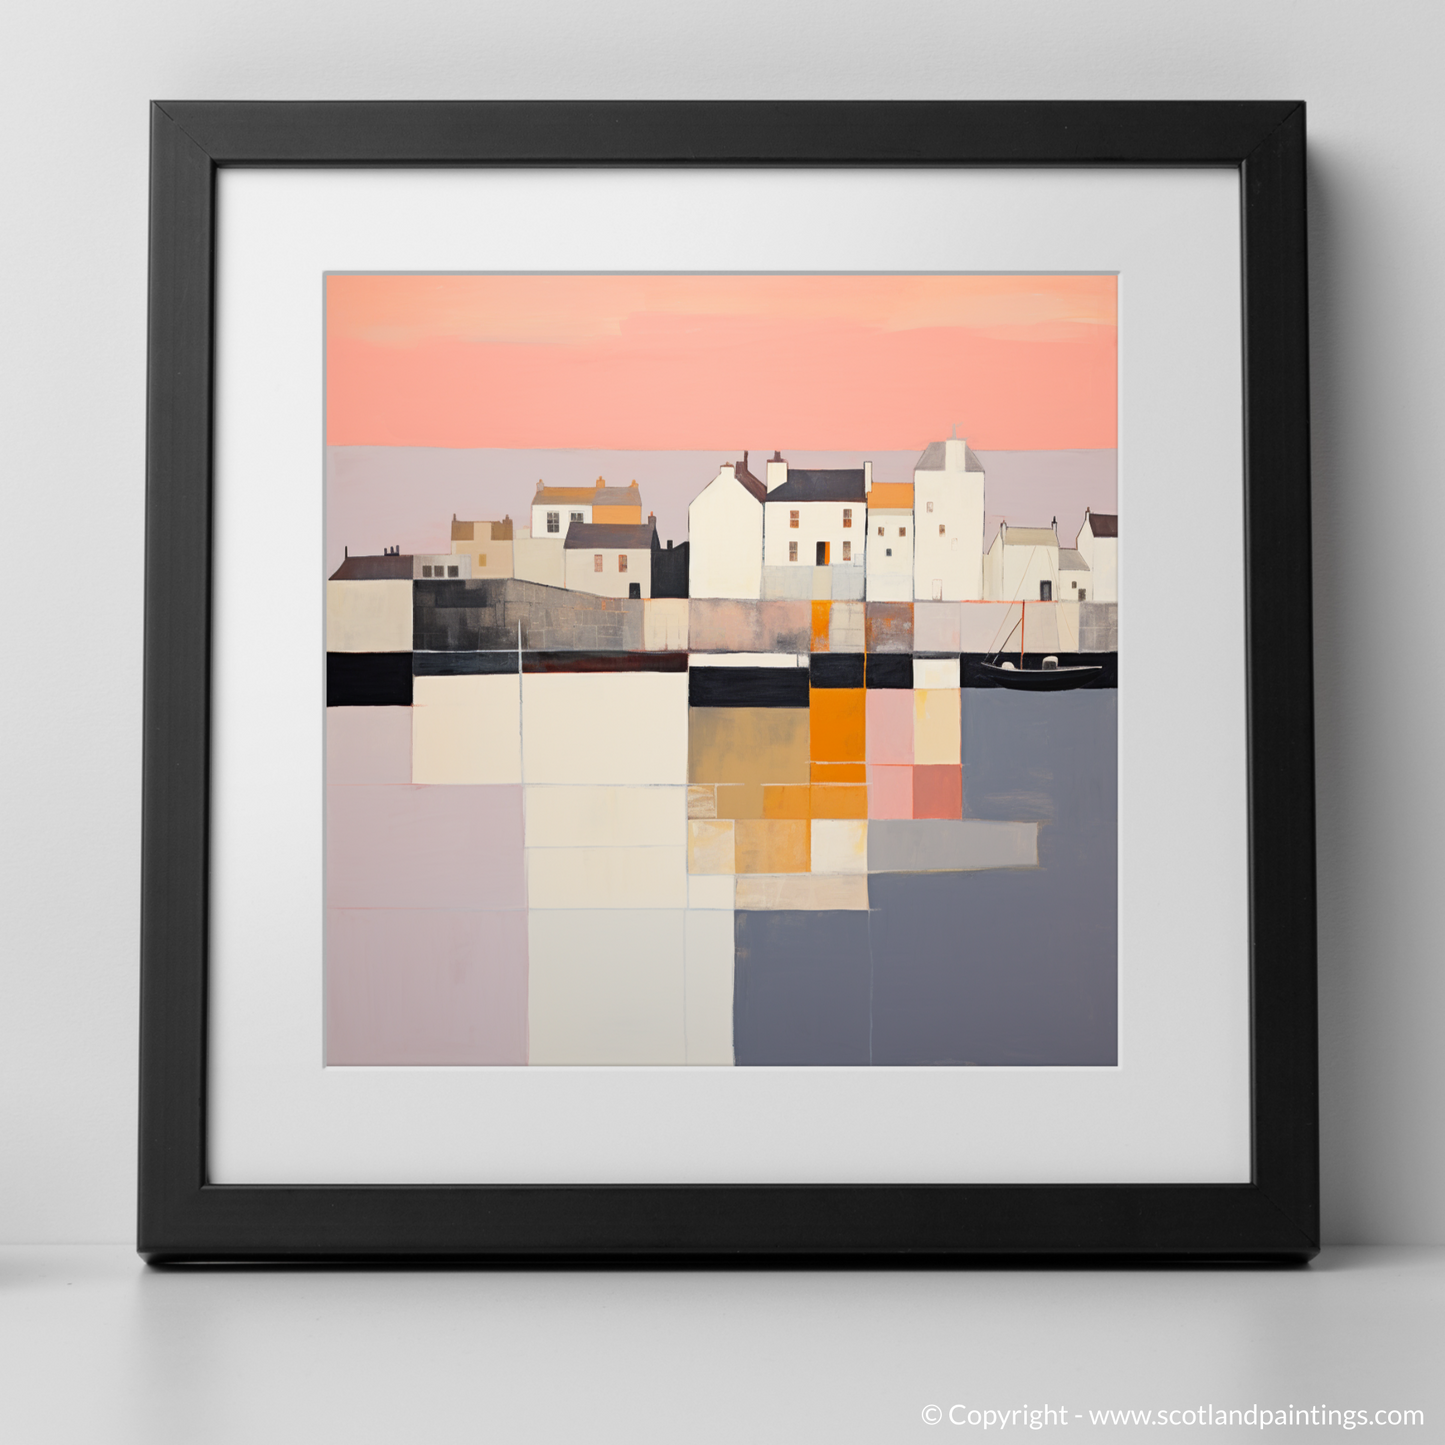 Pittenweem Harbour at Sunset: An Abstract Ode to Serenity